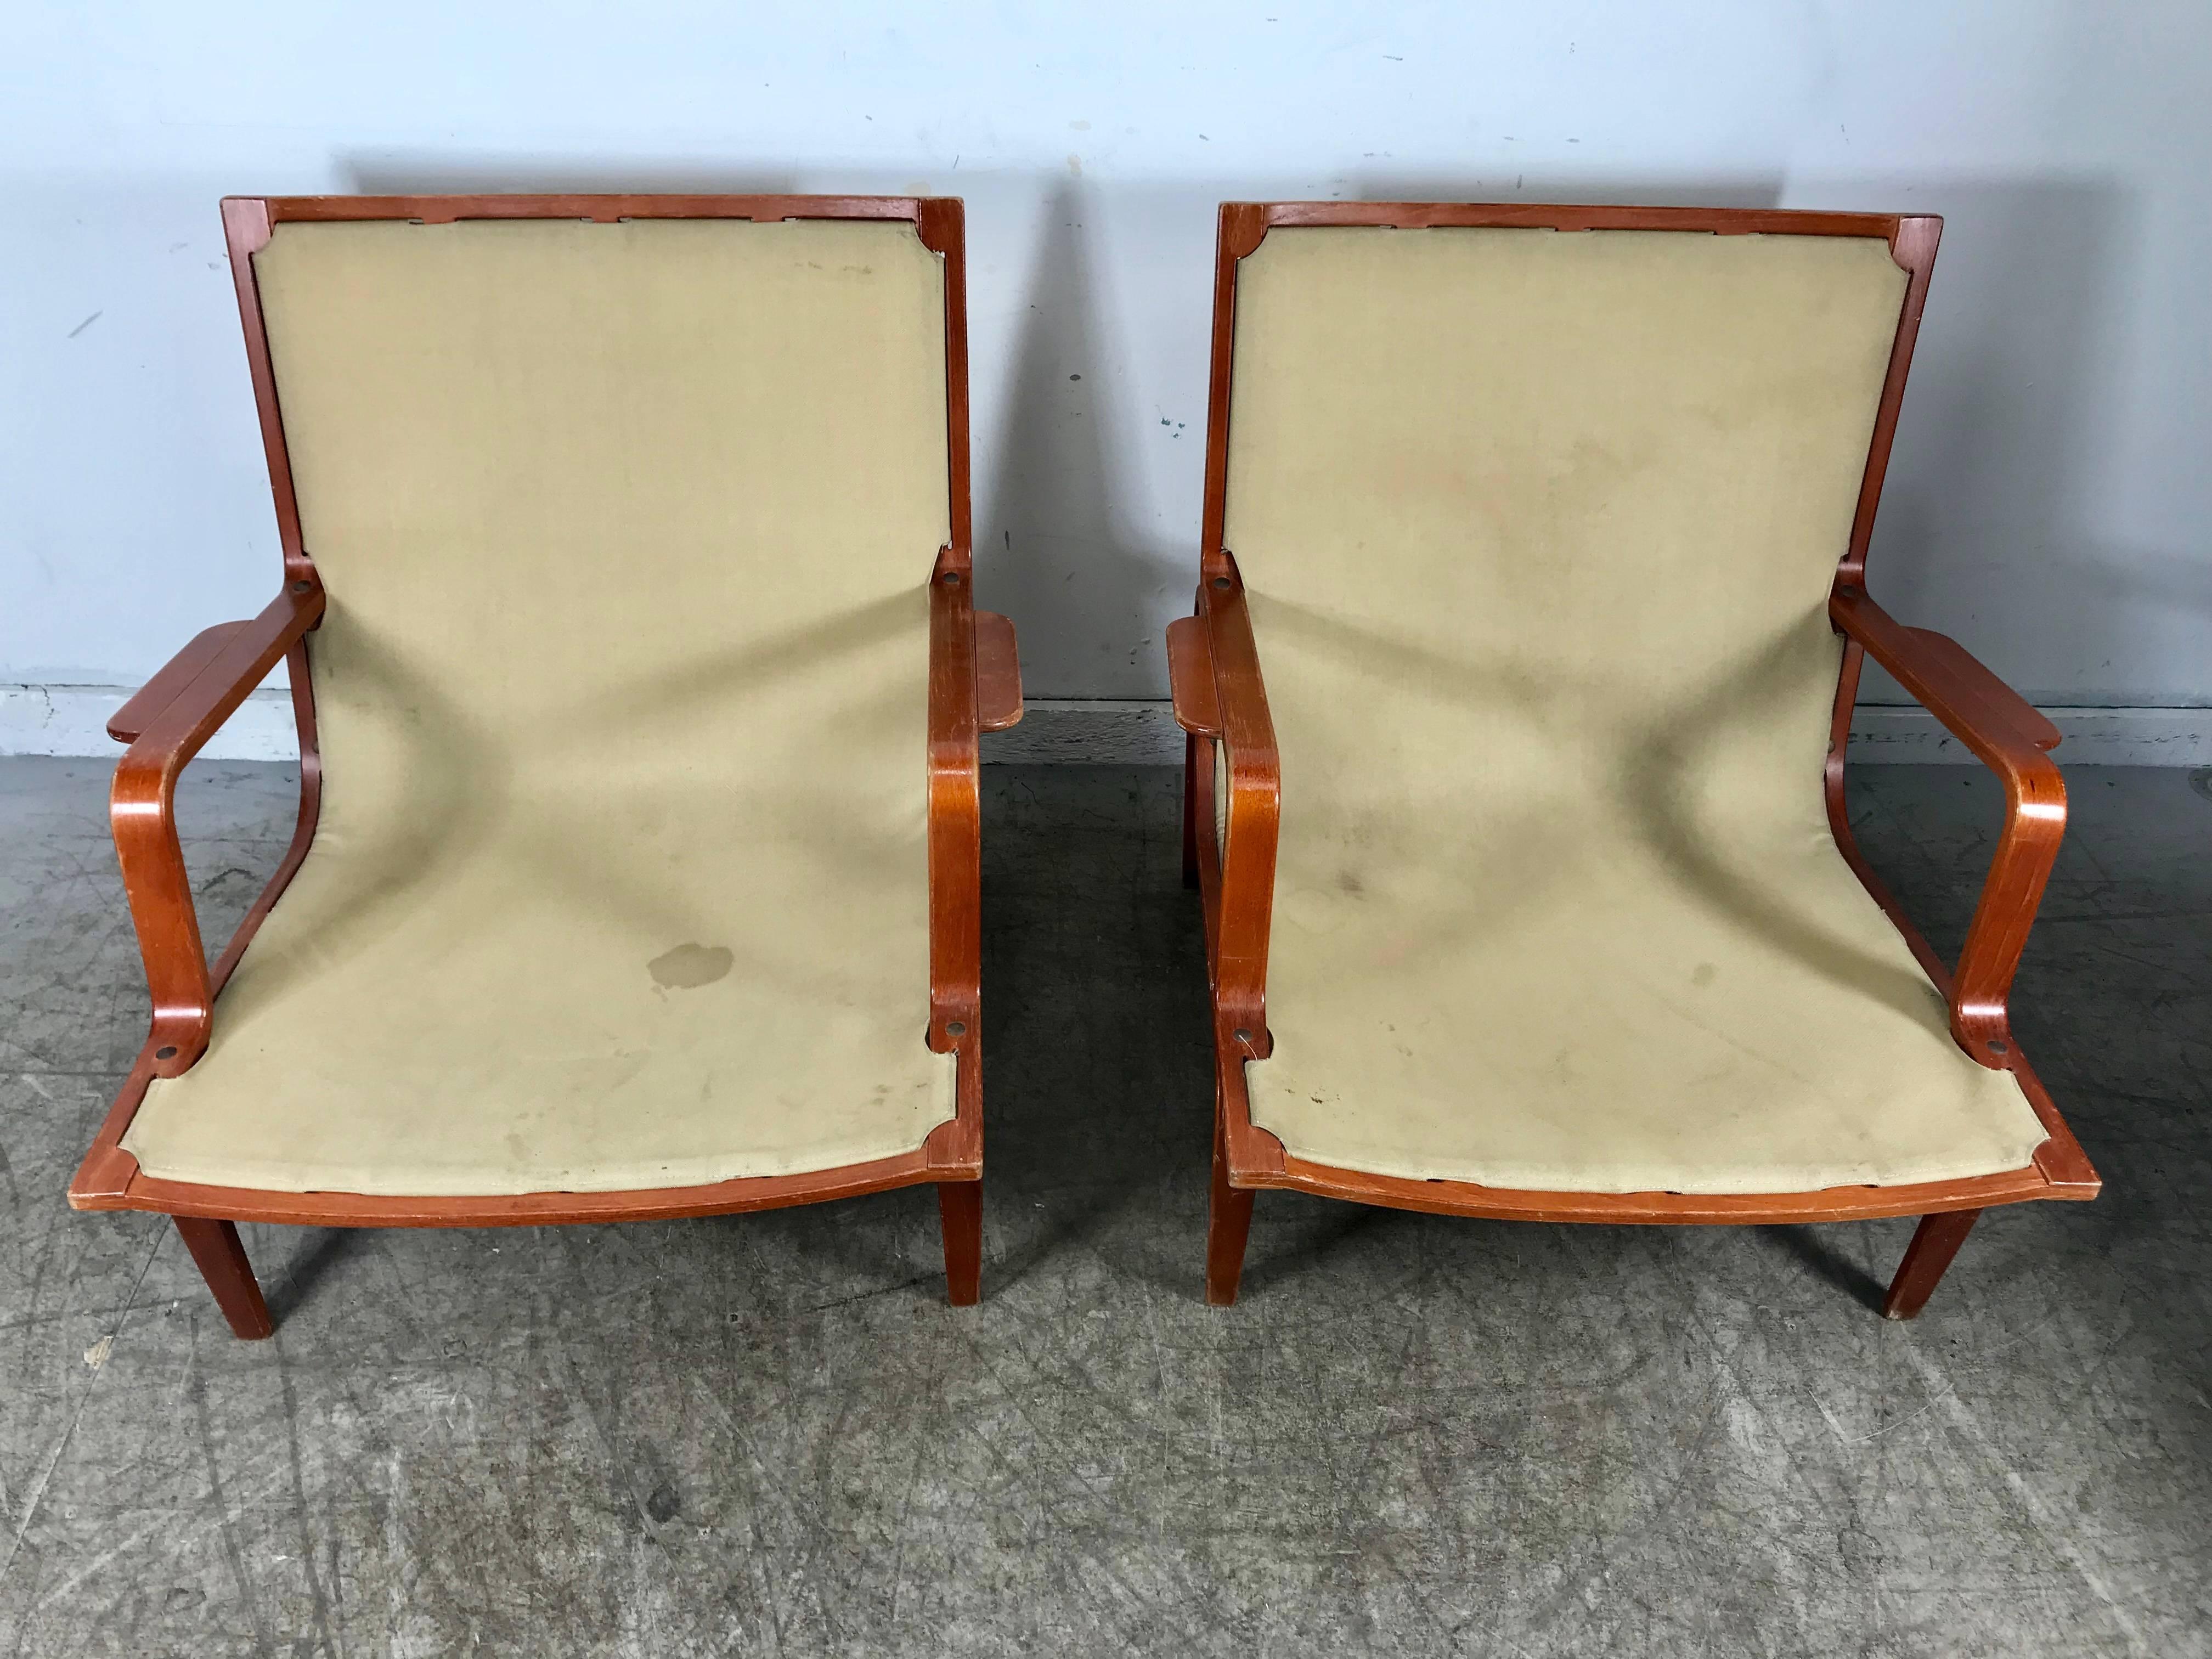 Pair of Bruno Mathsson Ingrid chairs Made by DUX, retain original finish and canvas slings, no cushions or armrests. Classic modernist design.